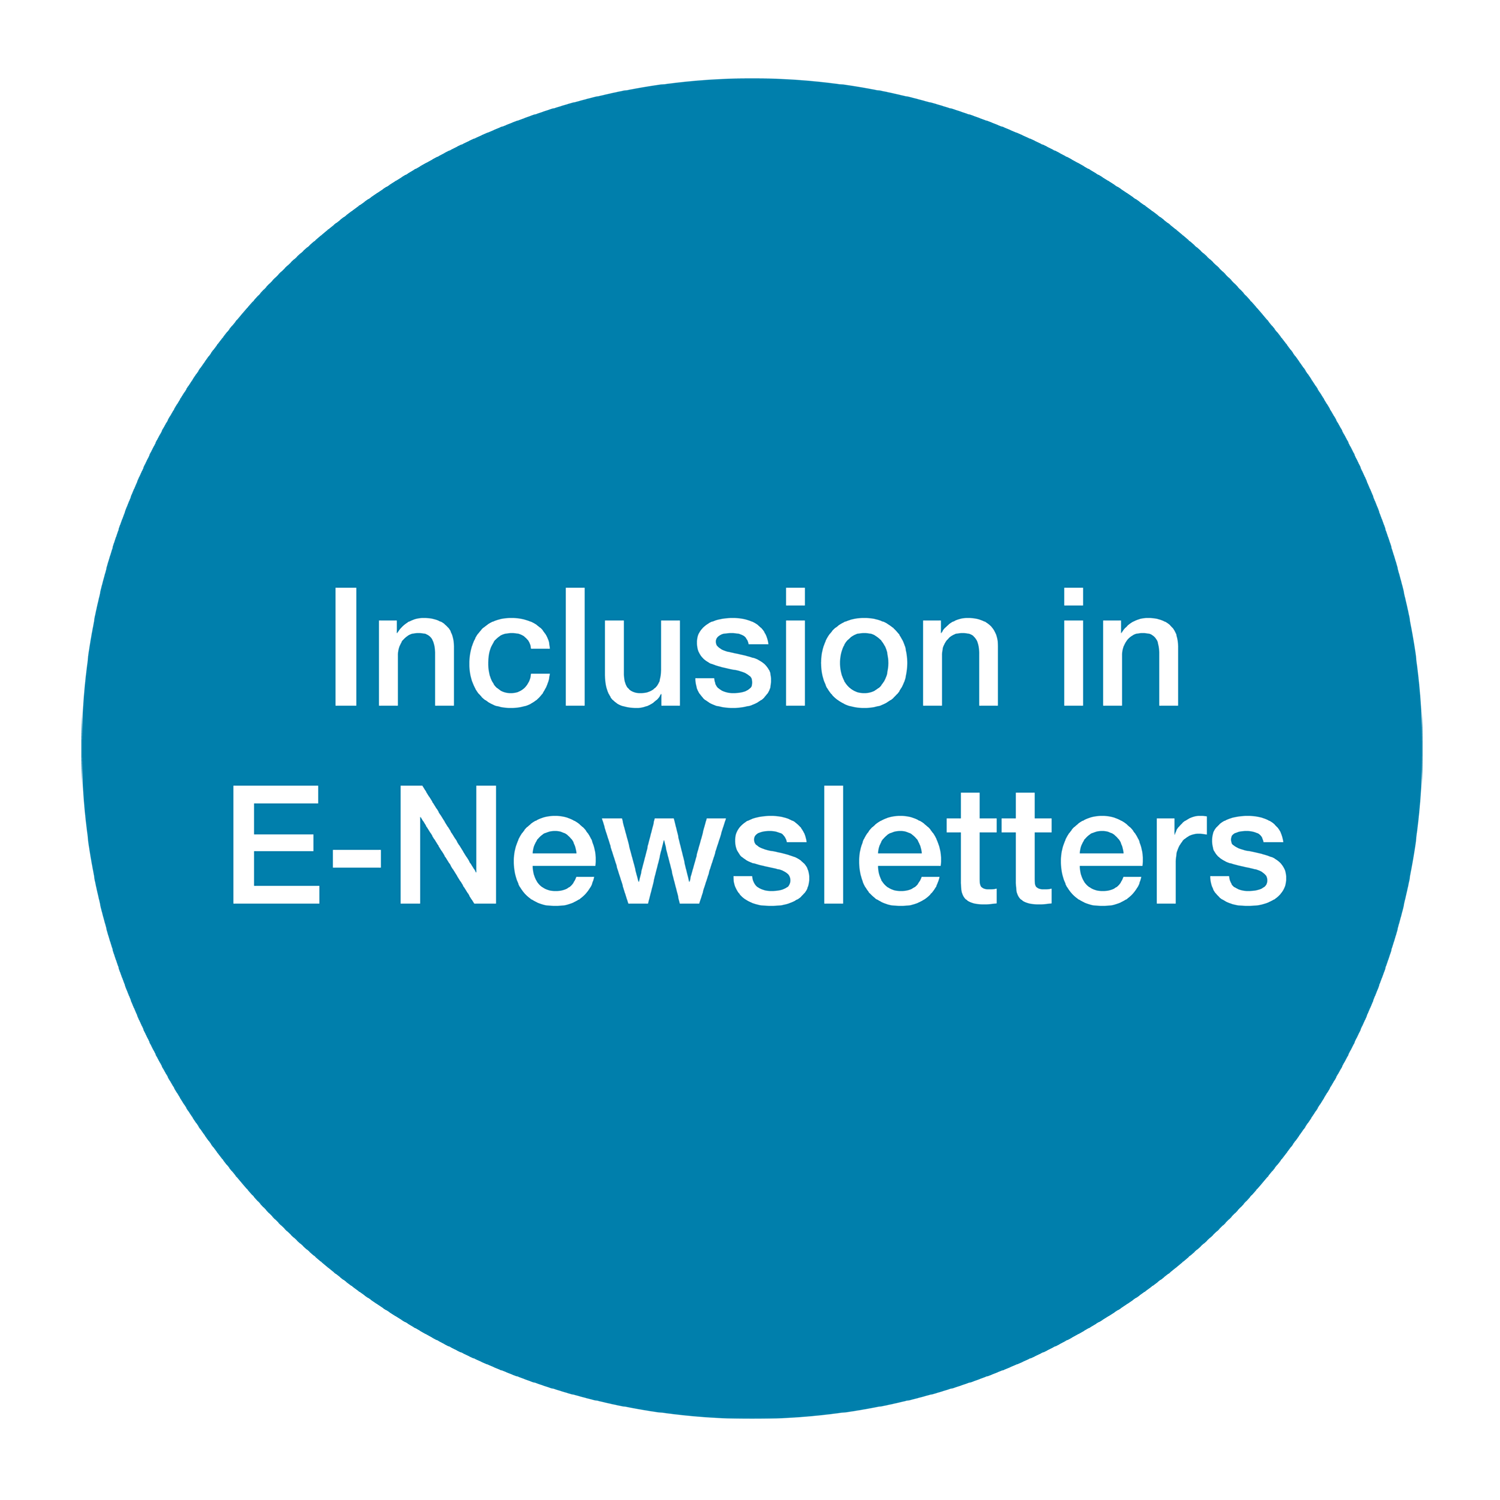 Inclusion in E-Newsletters